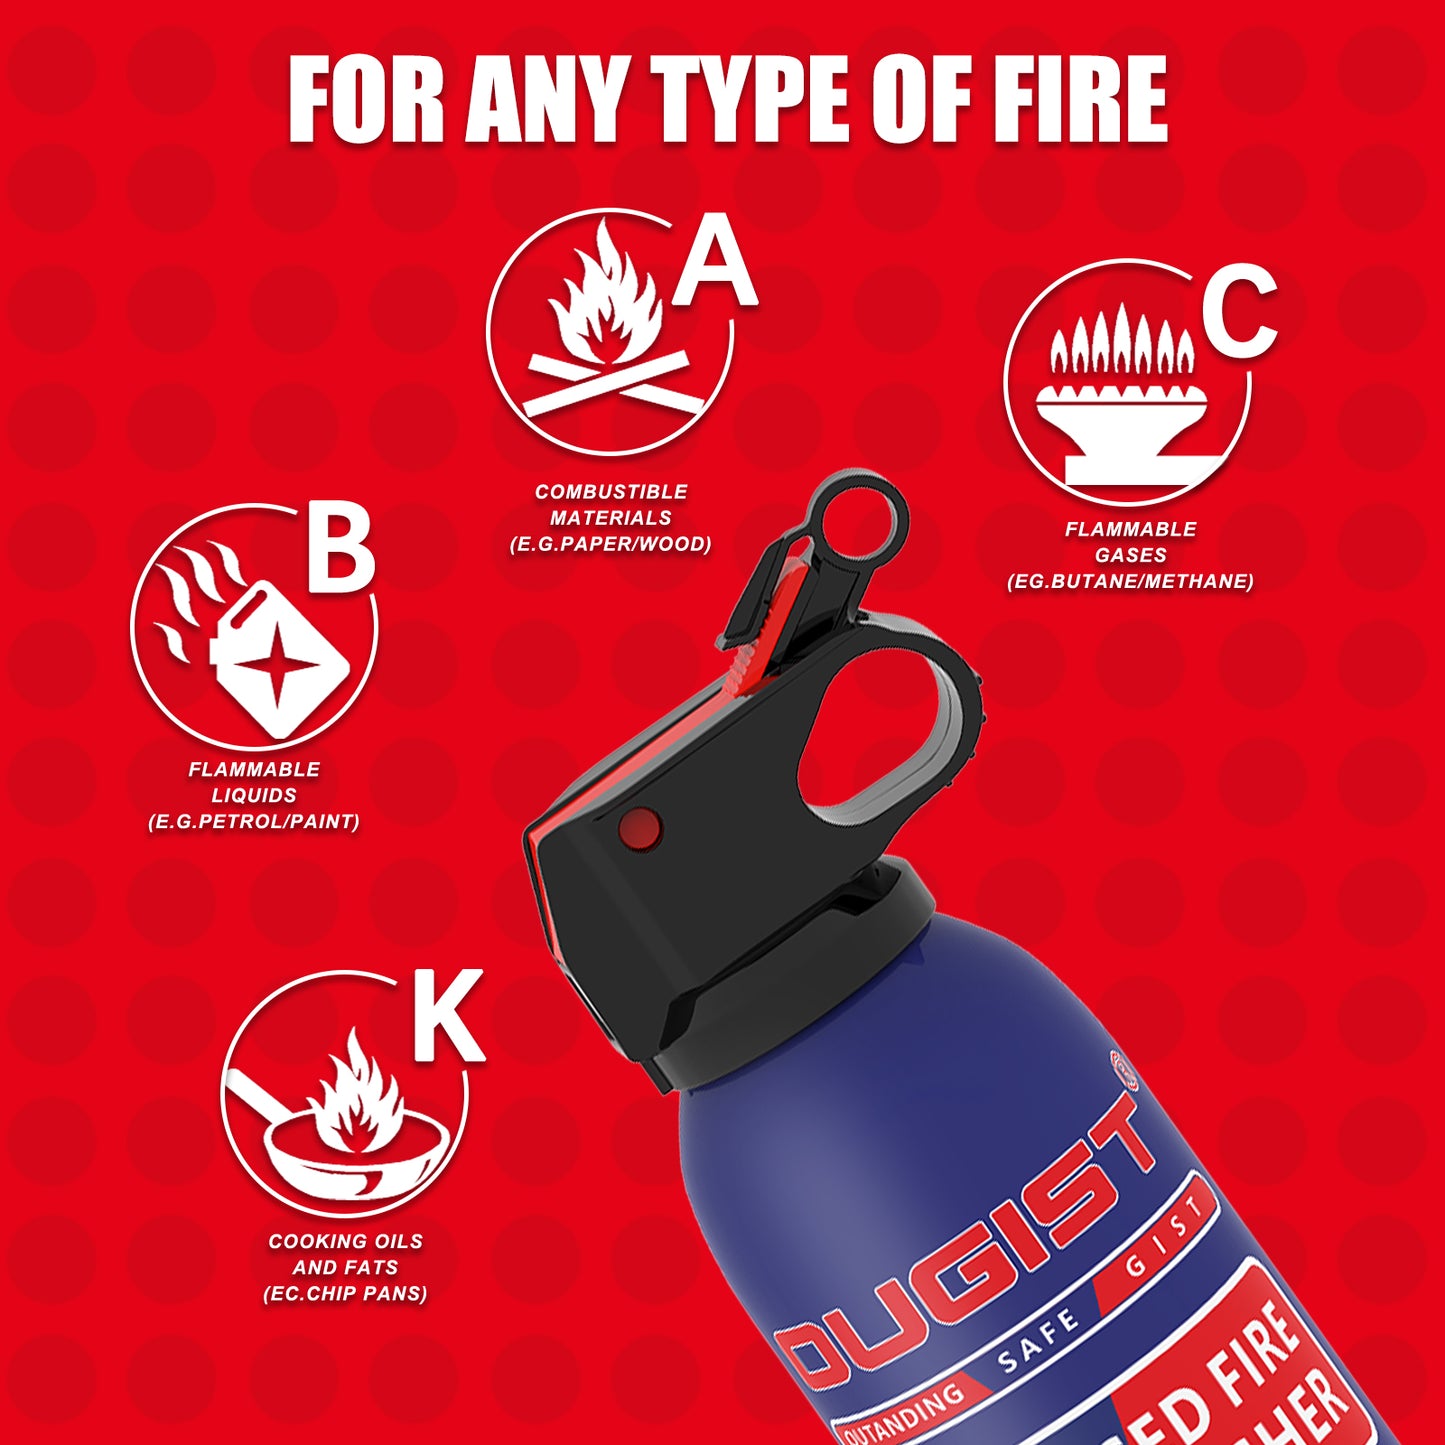 Dry Stop Fire Spray Extinguisher - 600g Quick-Acting Powder for Home, Car, Garage, Kitchen, 1A:10B:C:K Portable & Mess-Free Solution for Electrical, Grease Fires & More - 4 Pack